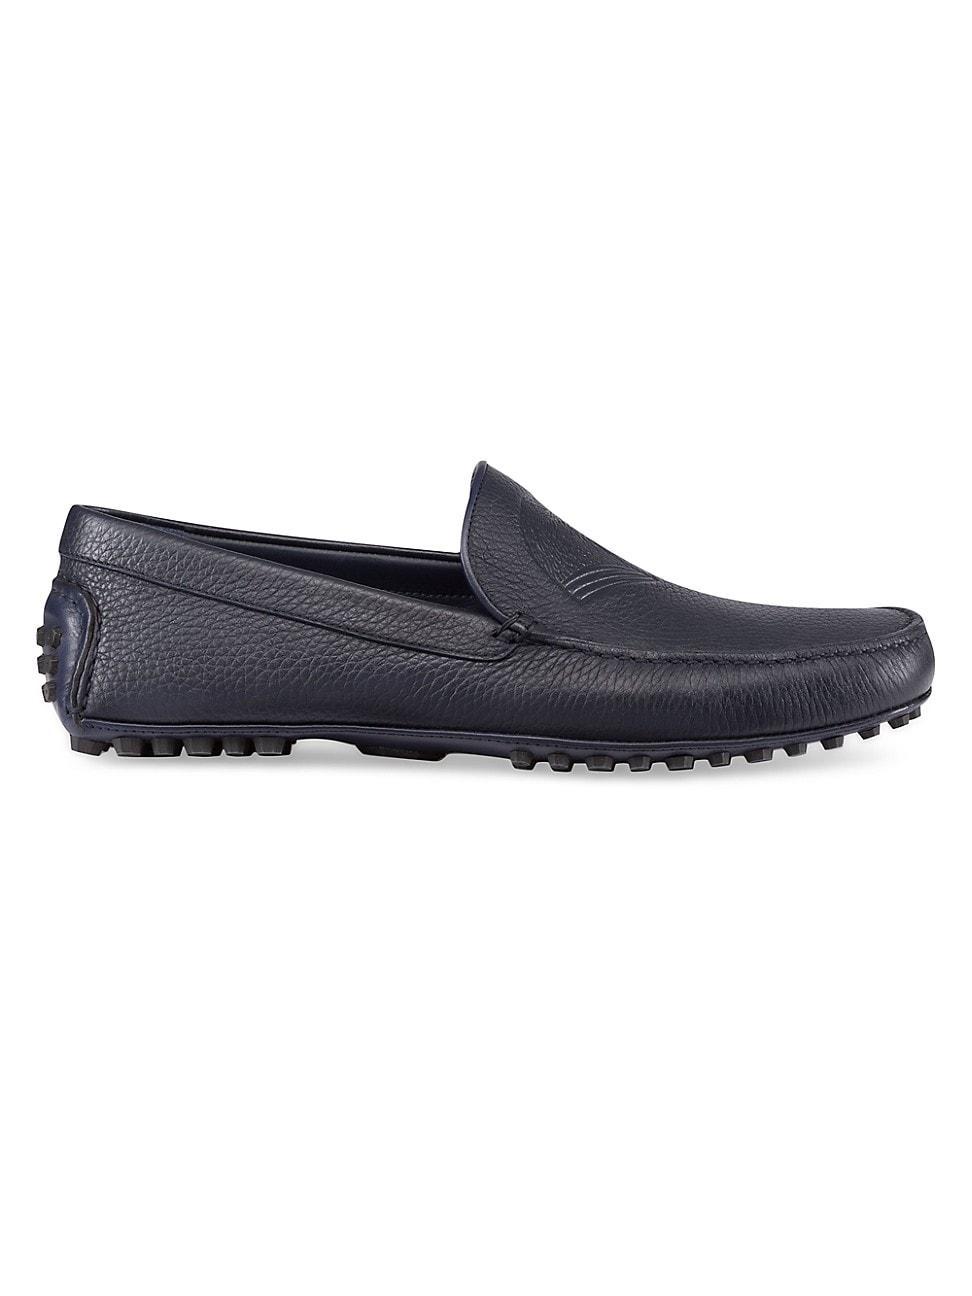 Mens Calfskin Leather Driving Shoes Product Image